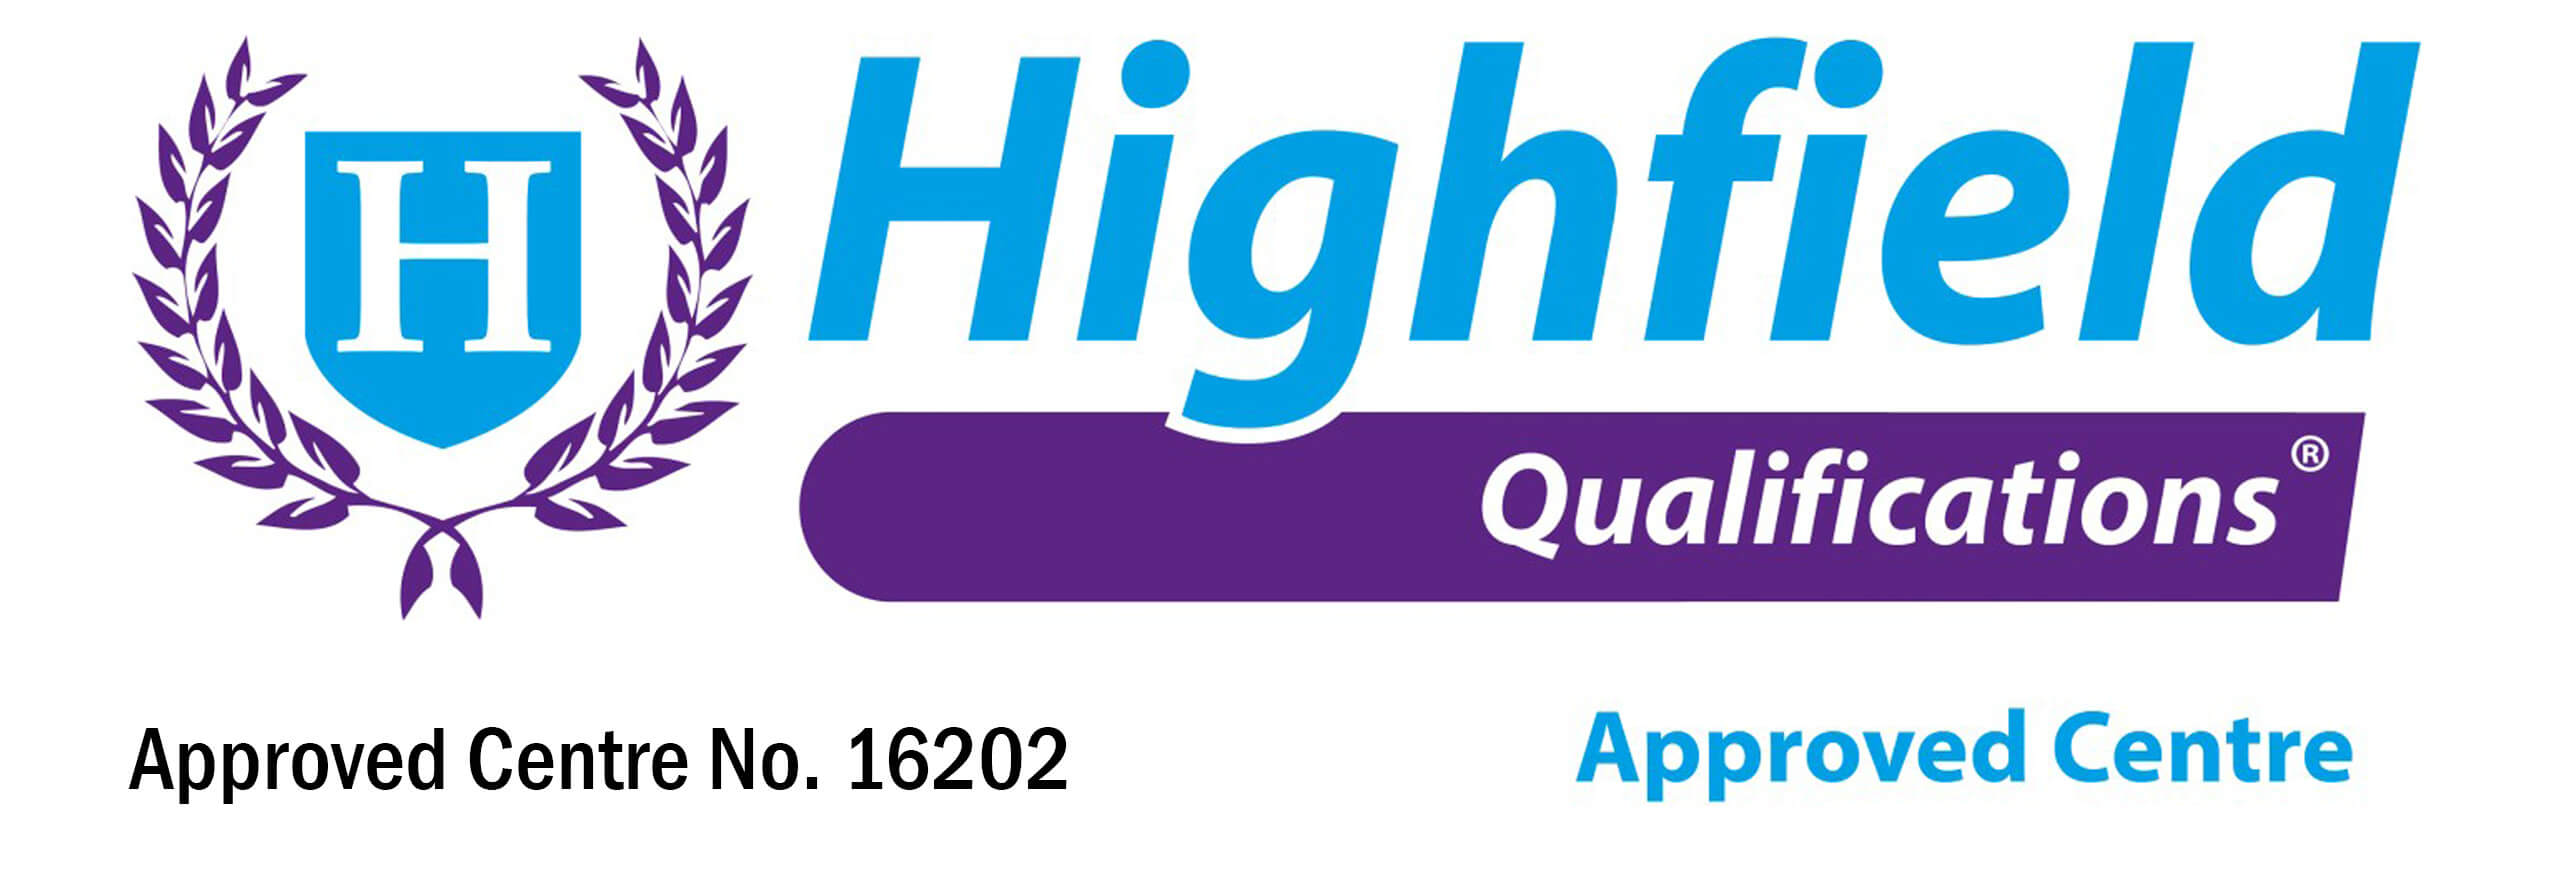 High field approved centre - approved centre number 16202